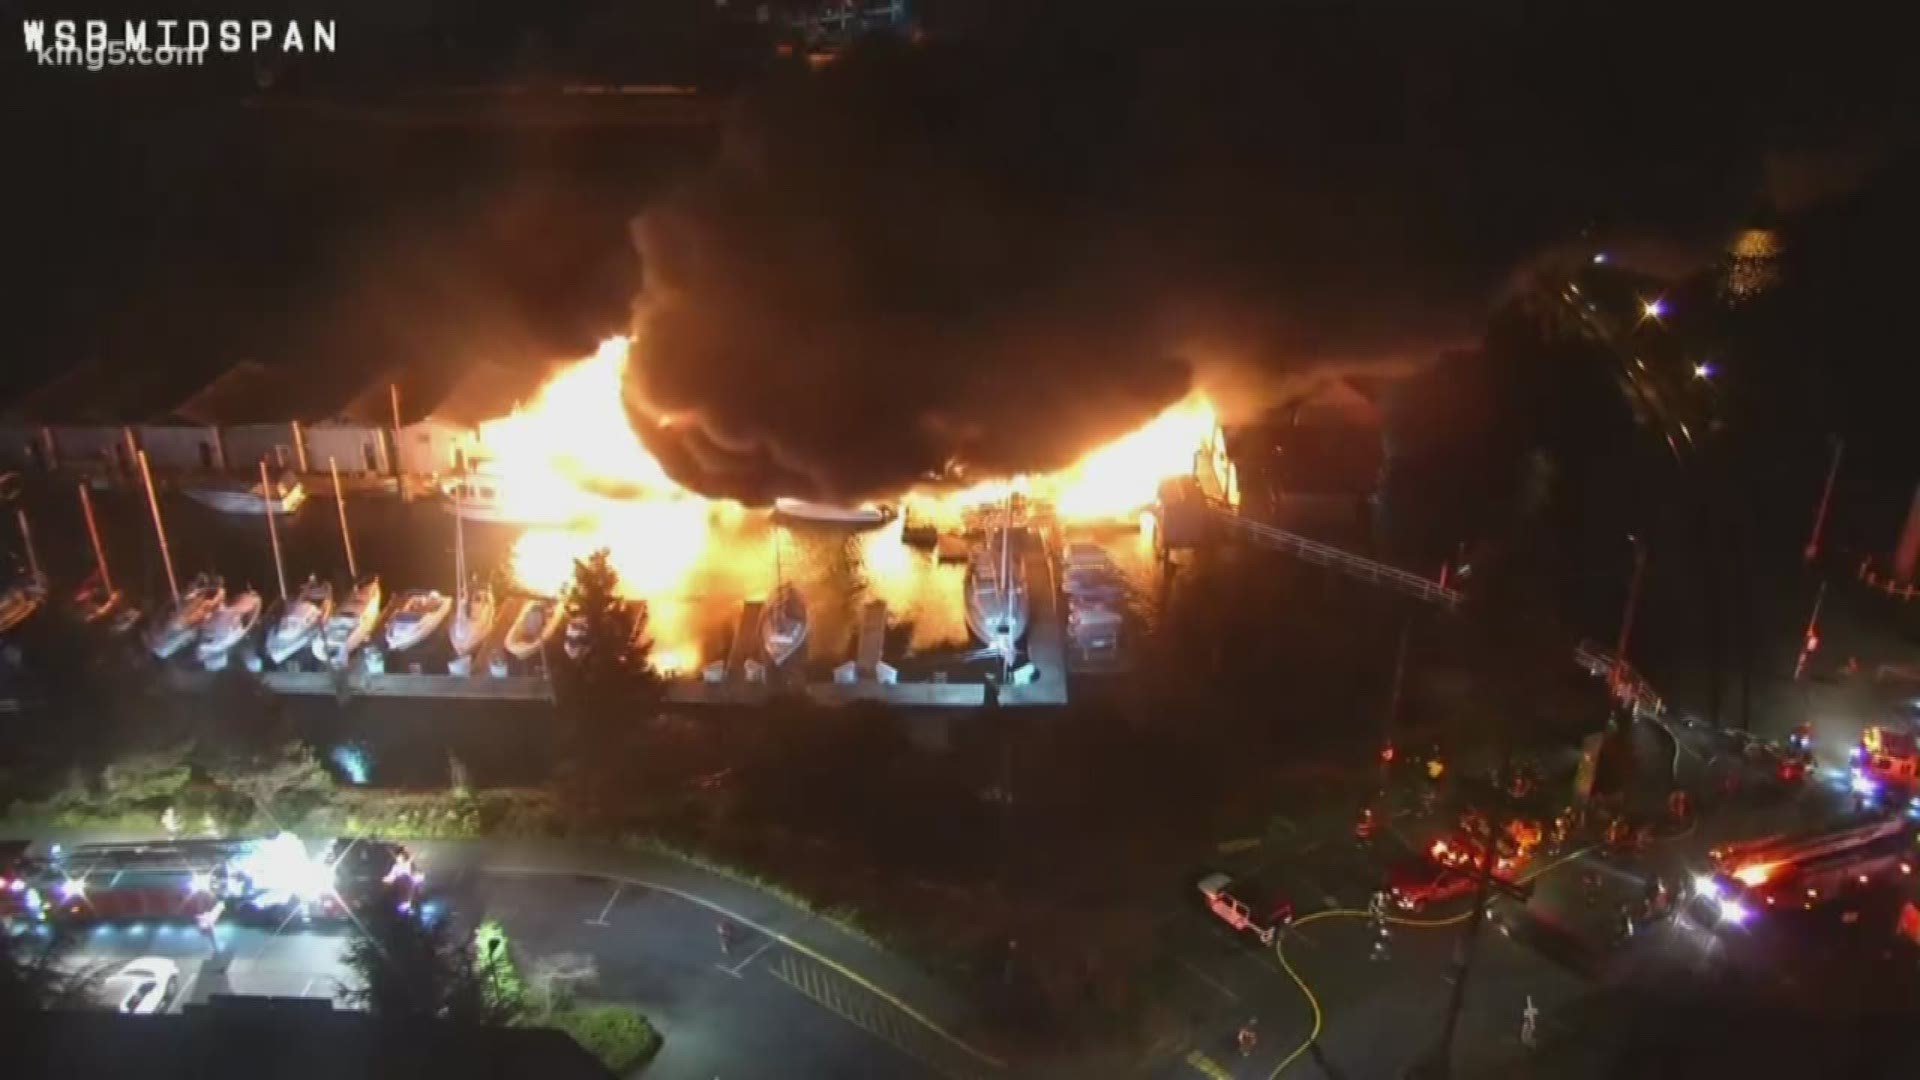 Firefighters knocked down a significant marina fire on Seattle's Harbor Island near the closed West Seattle Bridge.